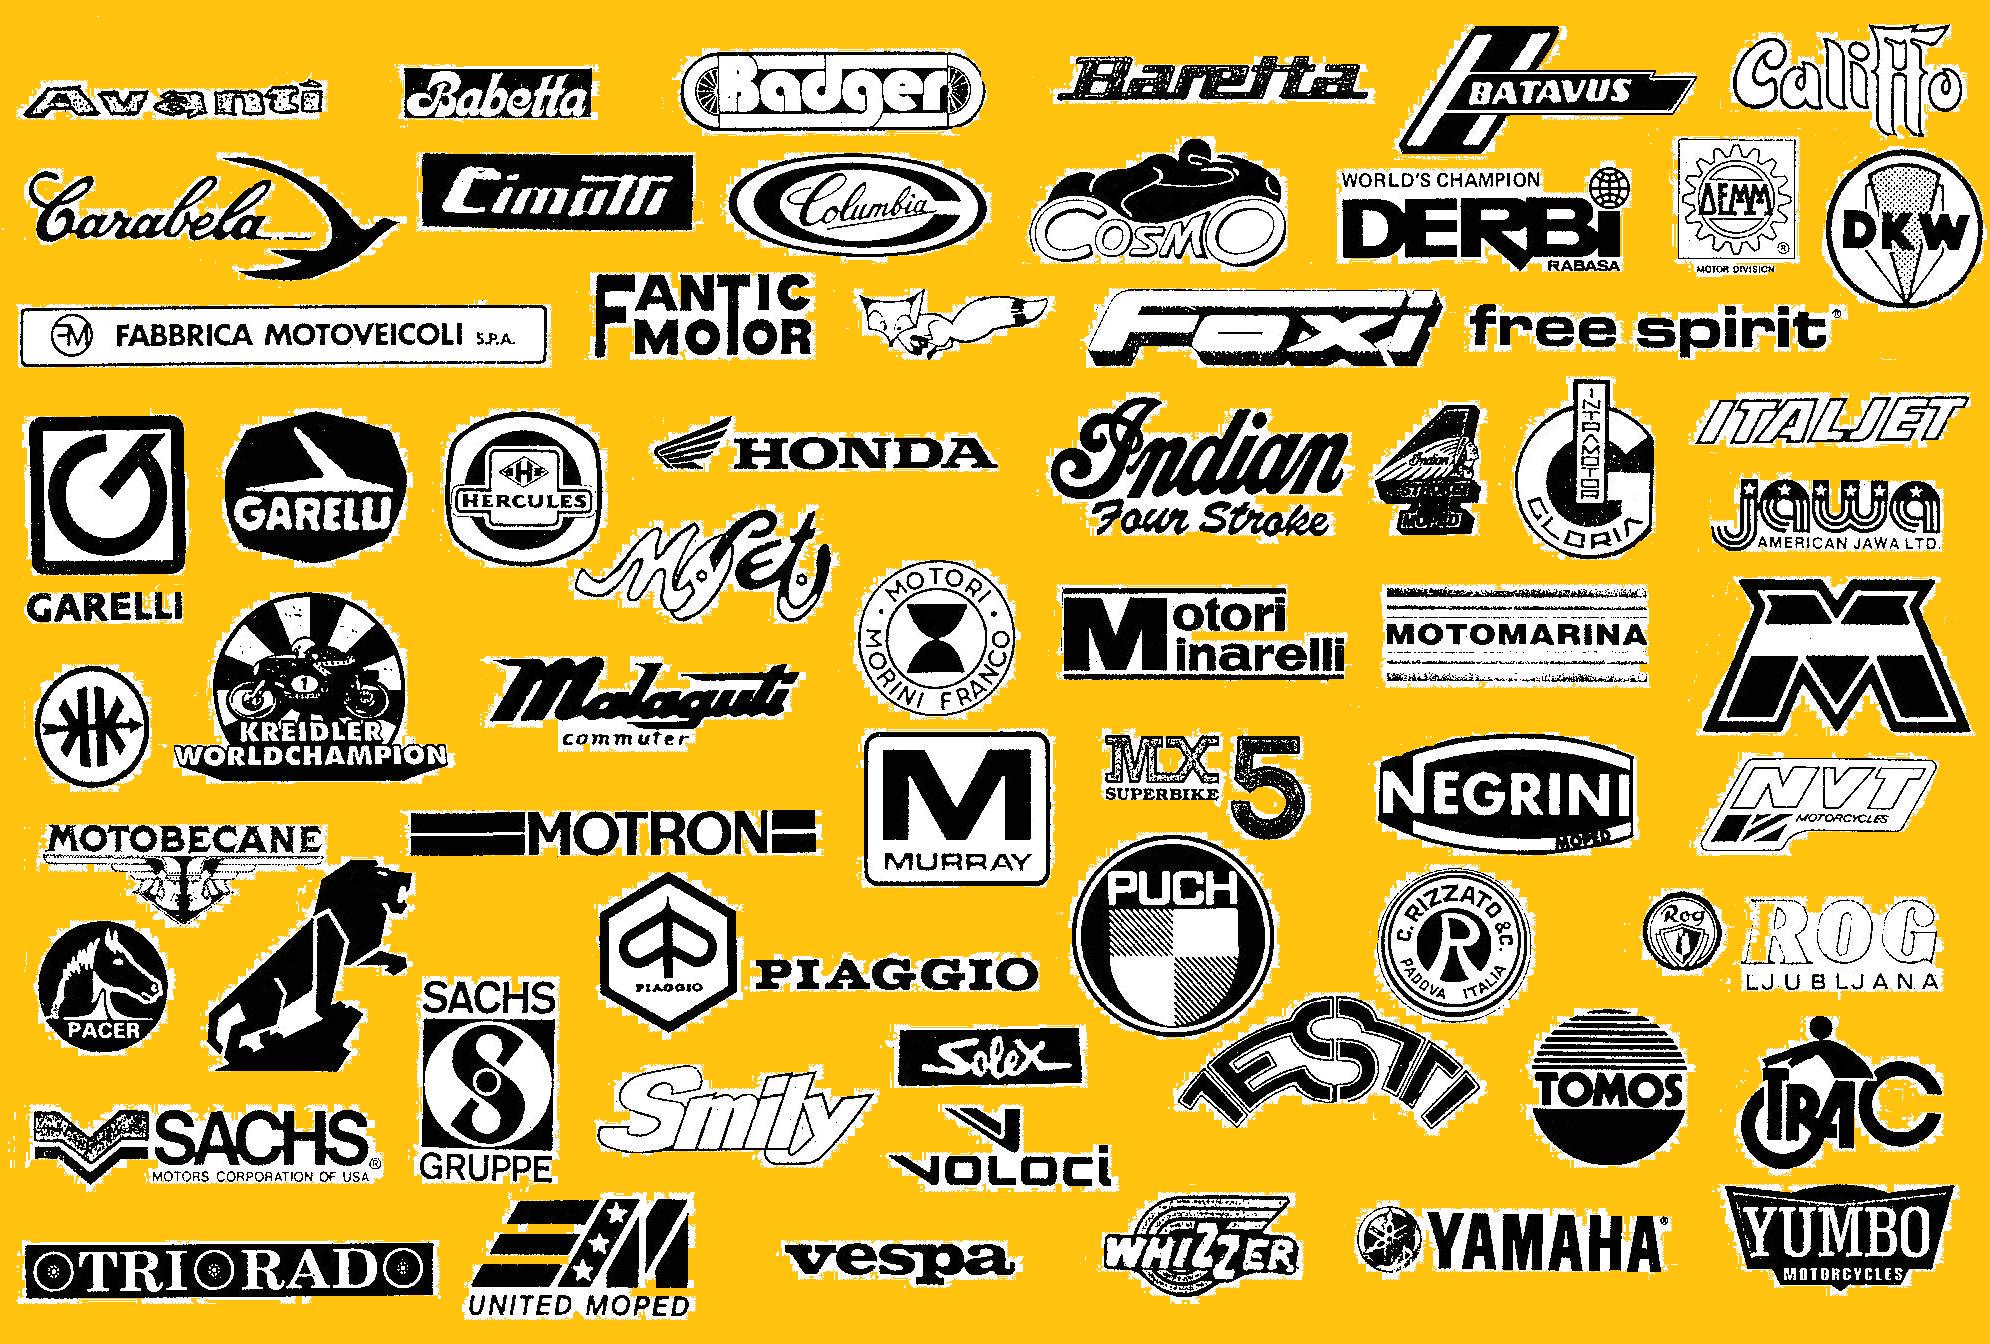 Black White Yello Logo - Does Anyone Know What Moped or Motorcycle This Is?